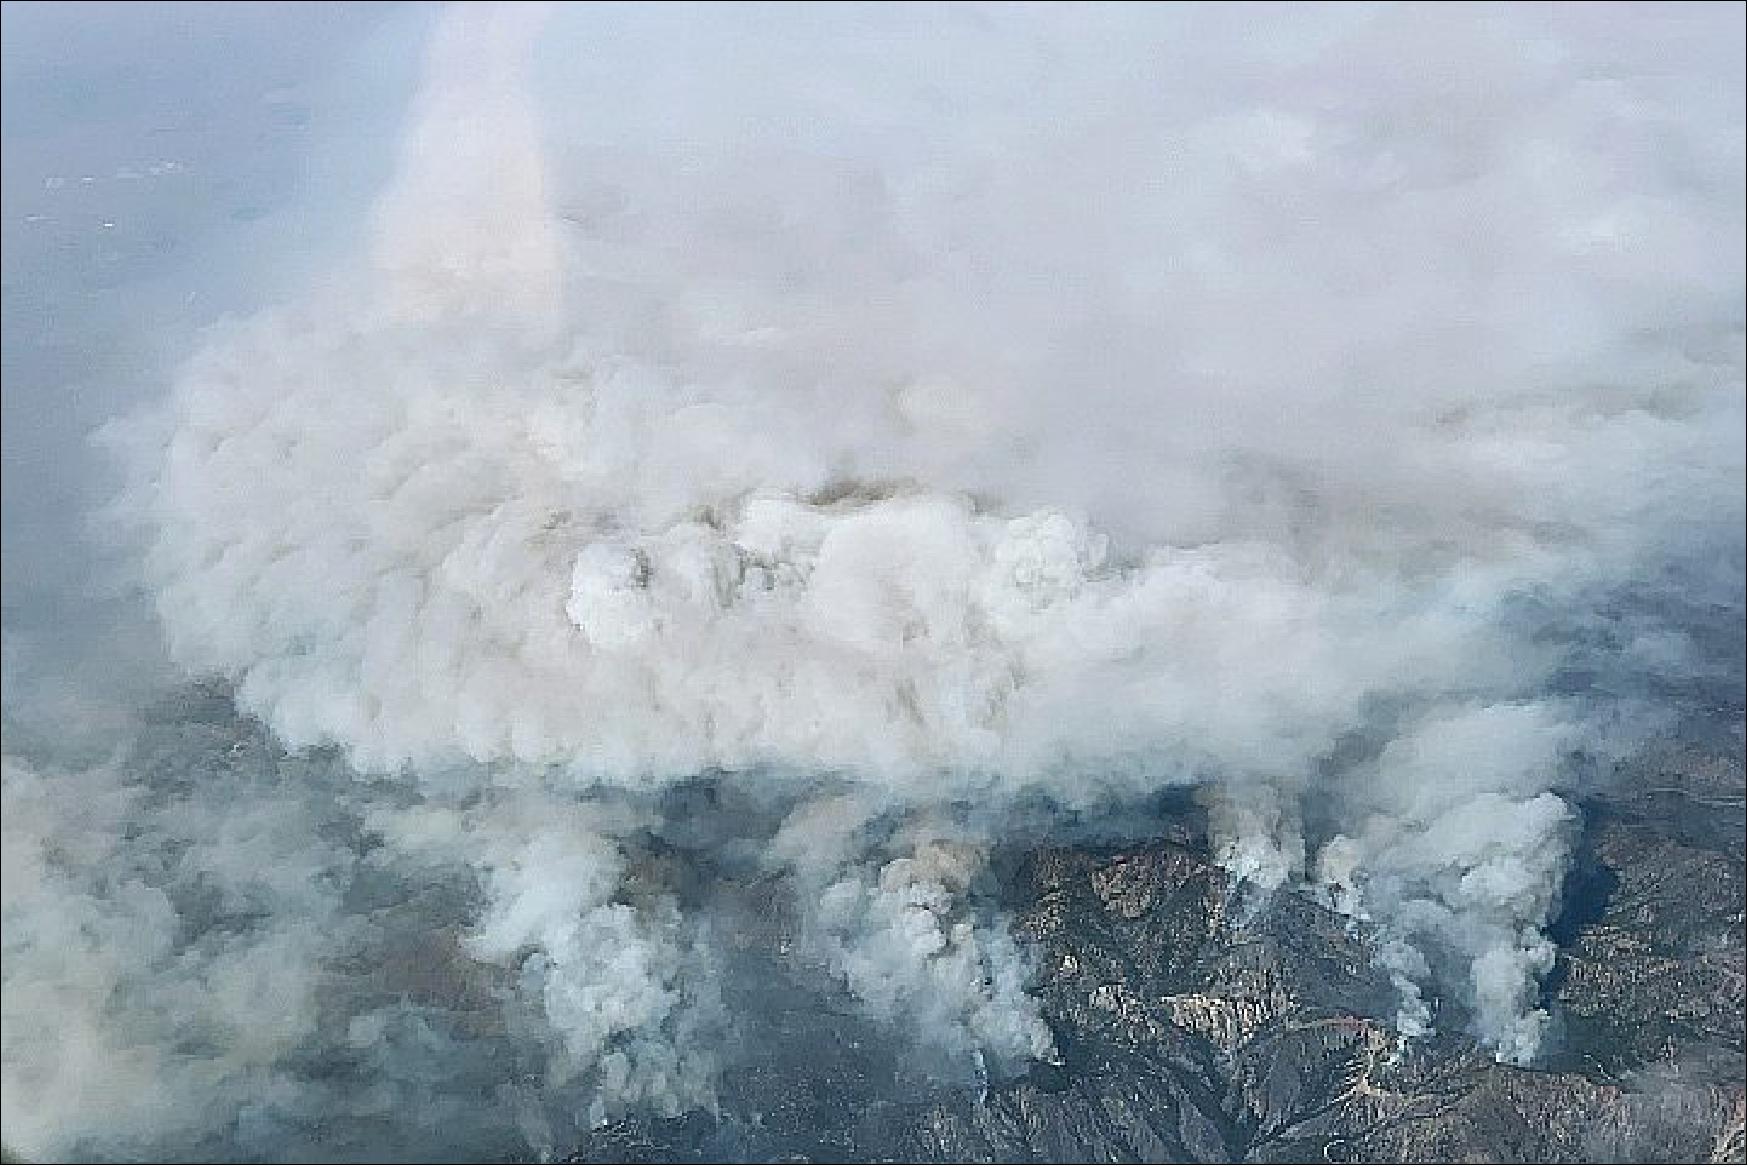 Figure 31: While Landsat and other satellites constantly collect data from space that is useful for monitoring fires, NASA sometimes deploys aircraft for advanced fire management research. In this case, the high-flying ER-2 surveyed the Bobcat fire on September 17, 2020, from a height of 65,000 feet (20,000 meters), about twice as high as commercial airliners fly. The pilot of the aircraft took the photograph of smoke rising from the fire shown above. Meanwhile, the Airborne Visible/Infrared Imaging Spectrometer (AVIRIS) sensor on board observed fine details of the fire’s temperature, the water content of vegetation canopies, characteristics of the smoke, and burn severity (image credit: NASA Earth observatory)